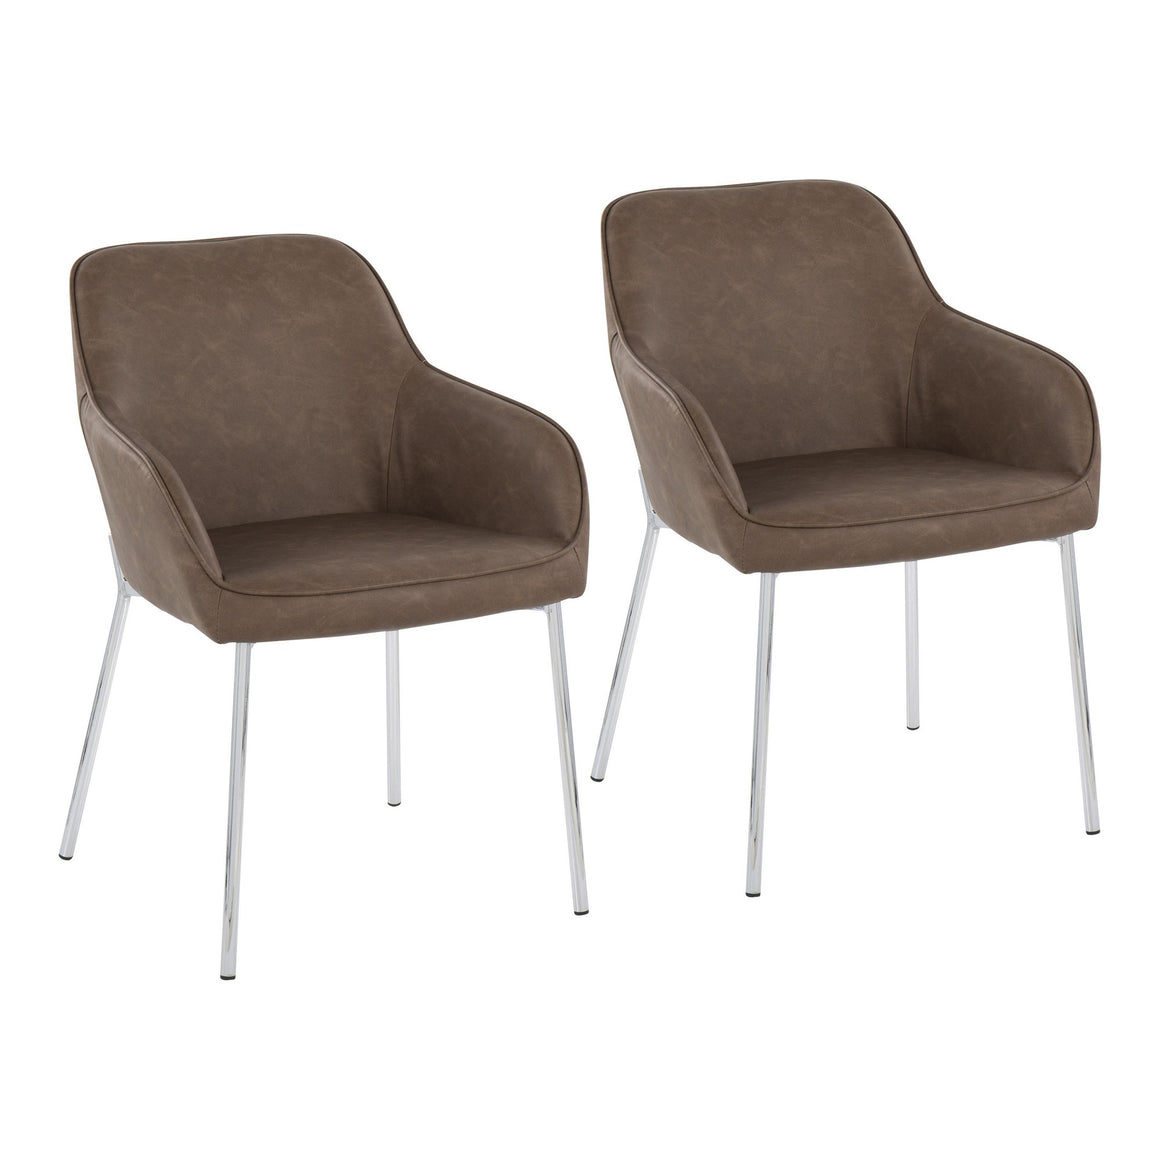 Daniella Contemporary Dining Chair in Chrome Steel and Espresso Faux Leather by LumiSource - Set of 2